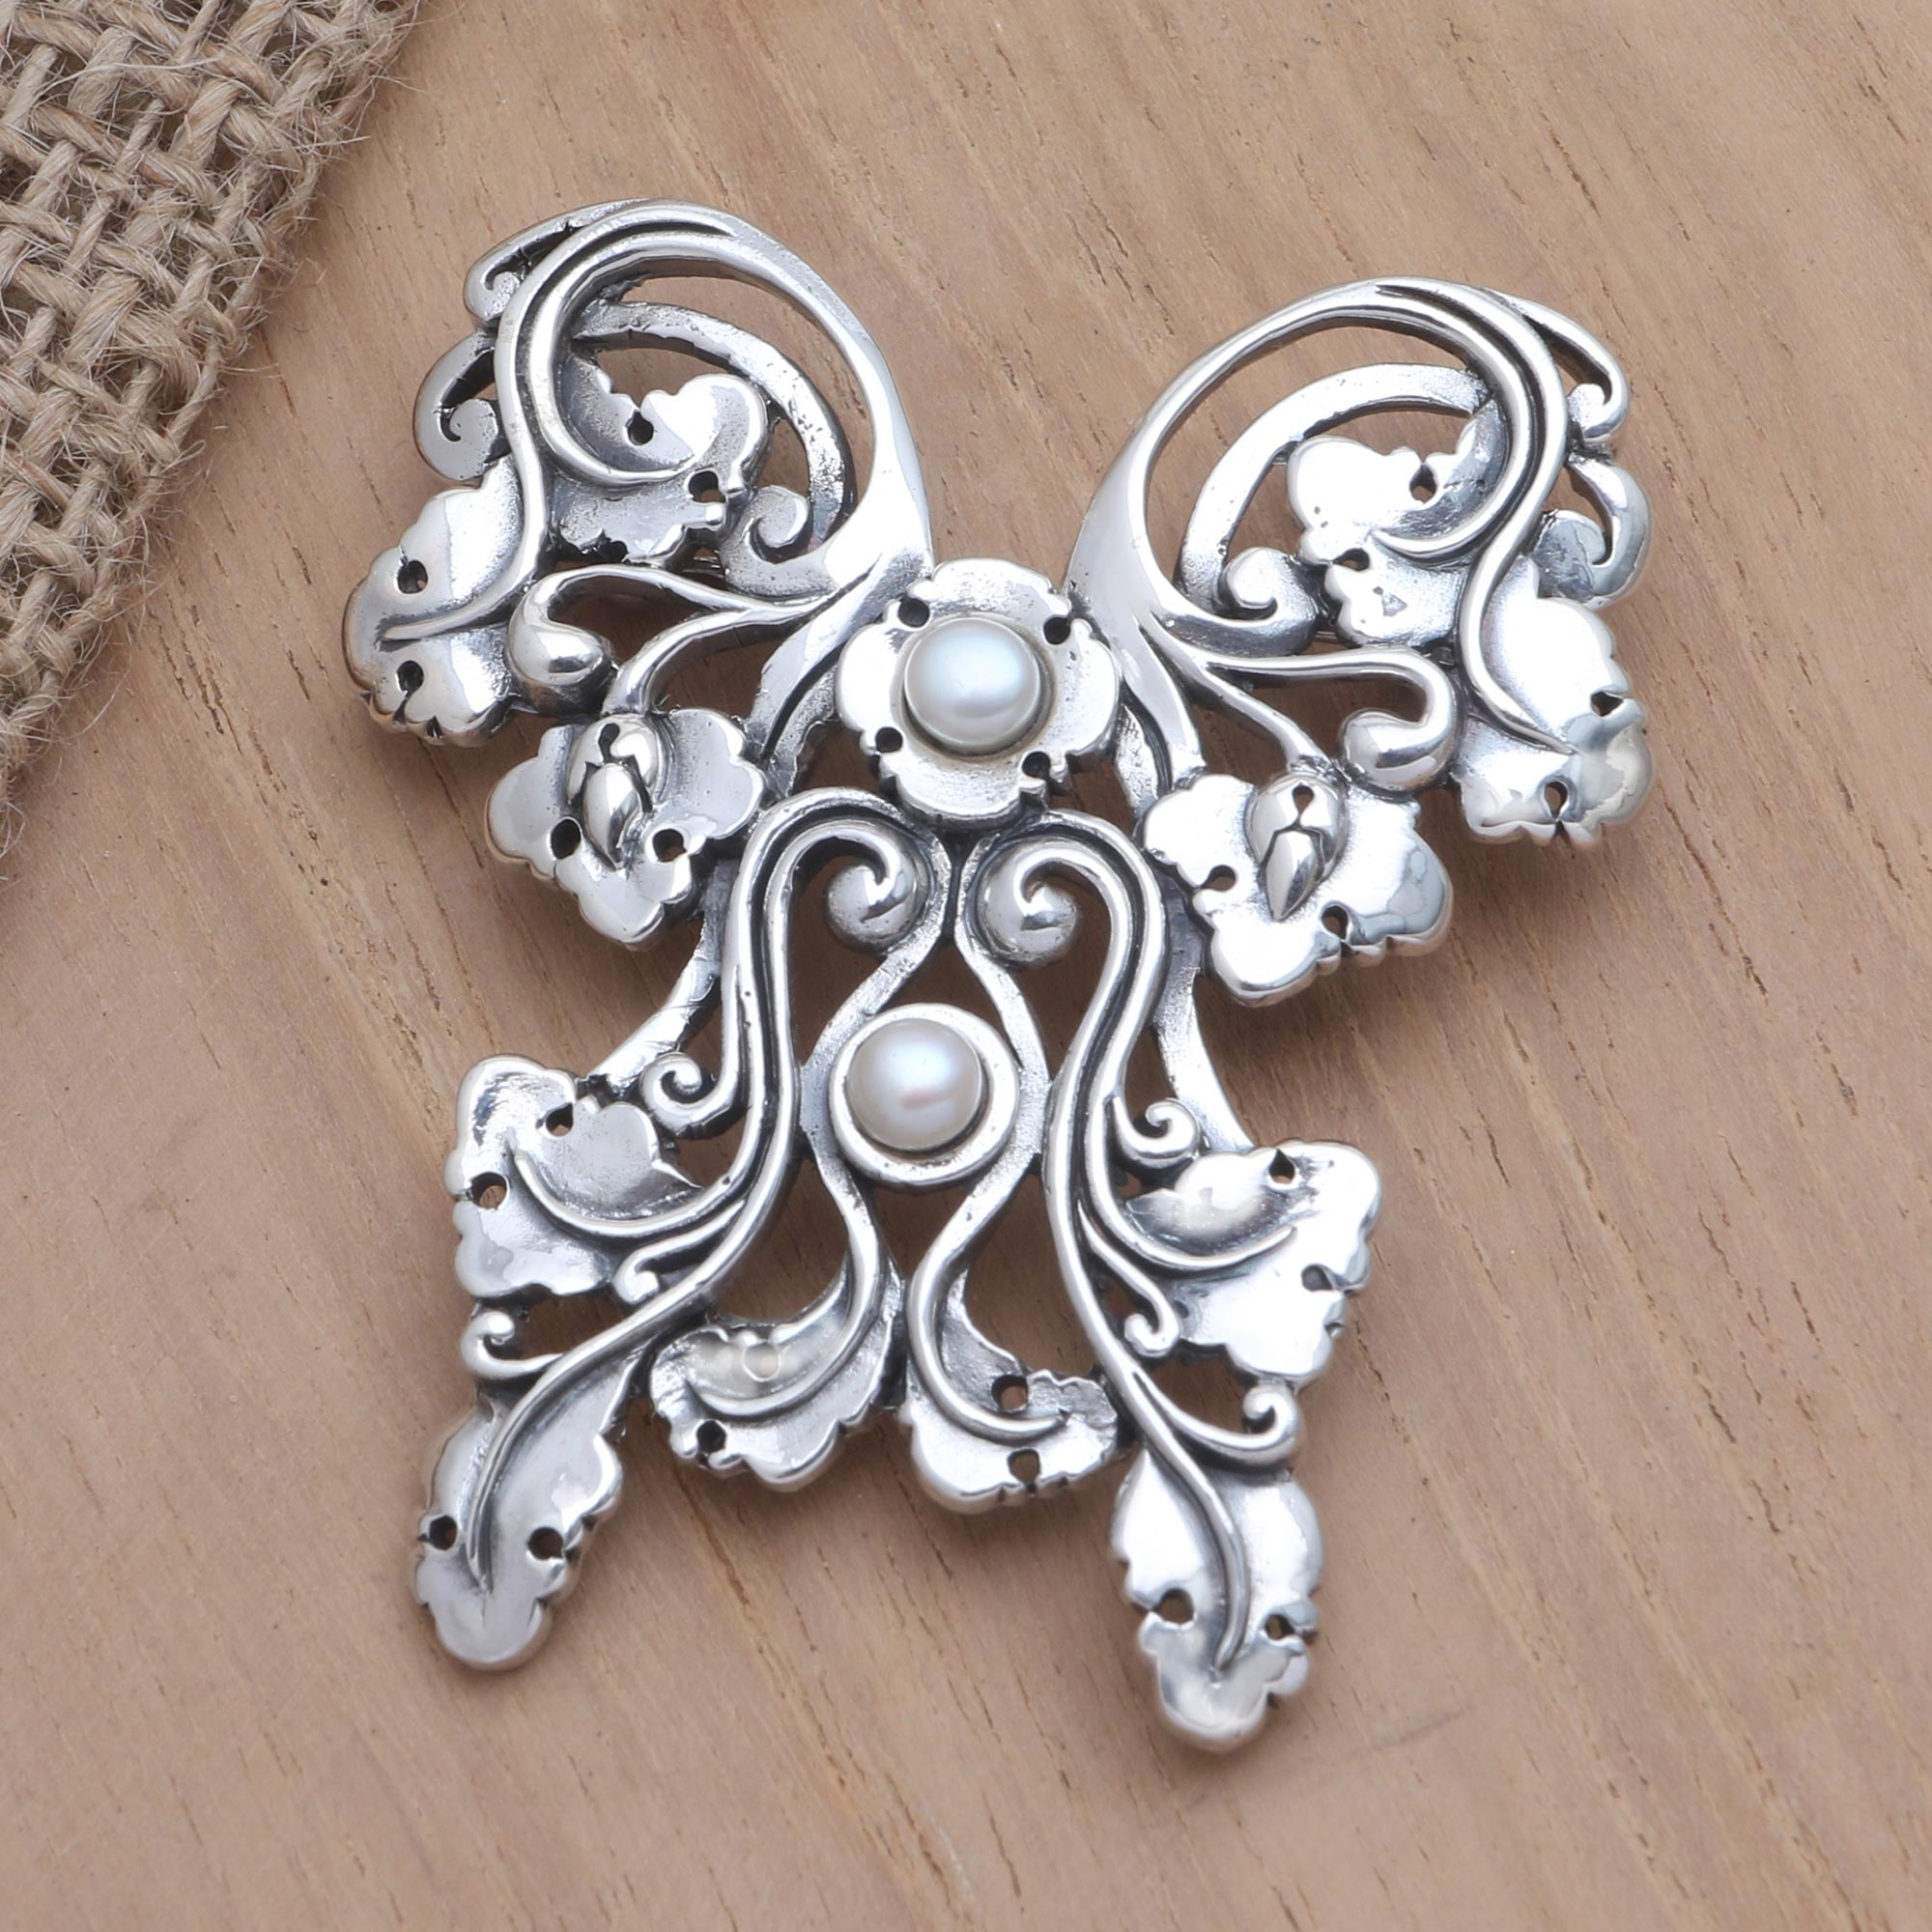 NOVICA .925 Sterling Silver Brooch Aged Catacos Butterfly